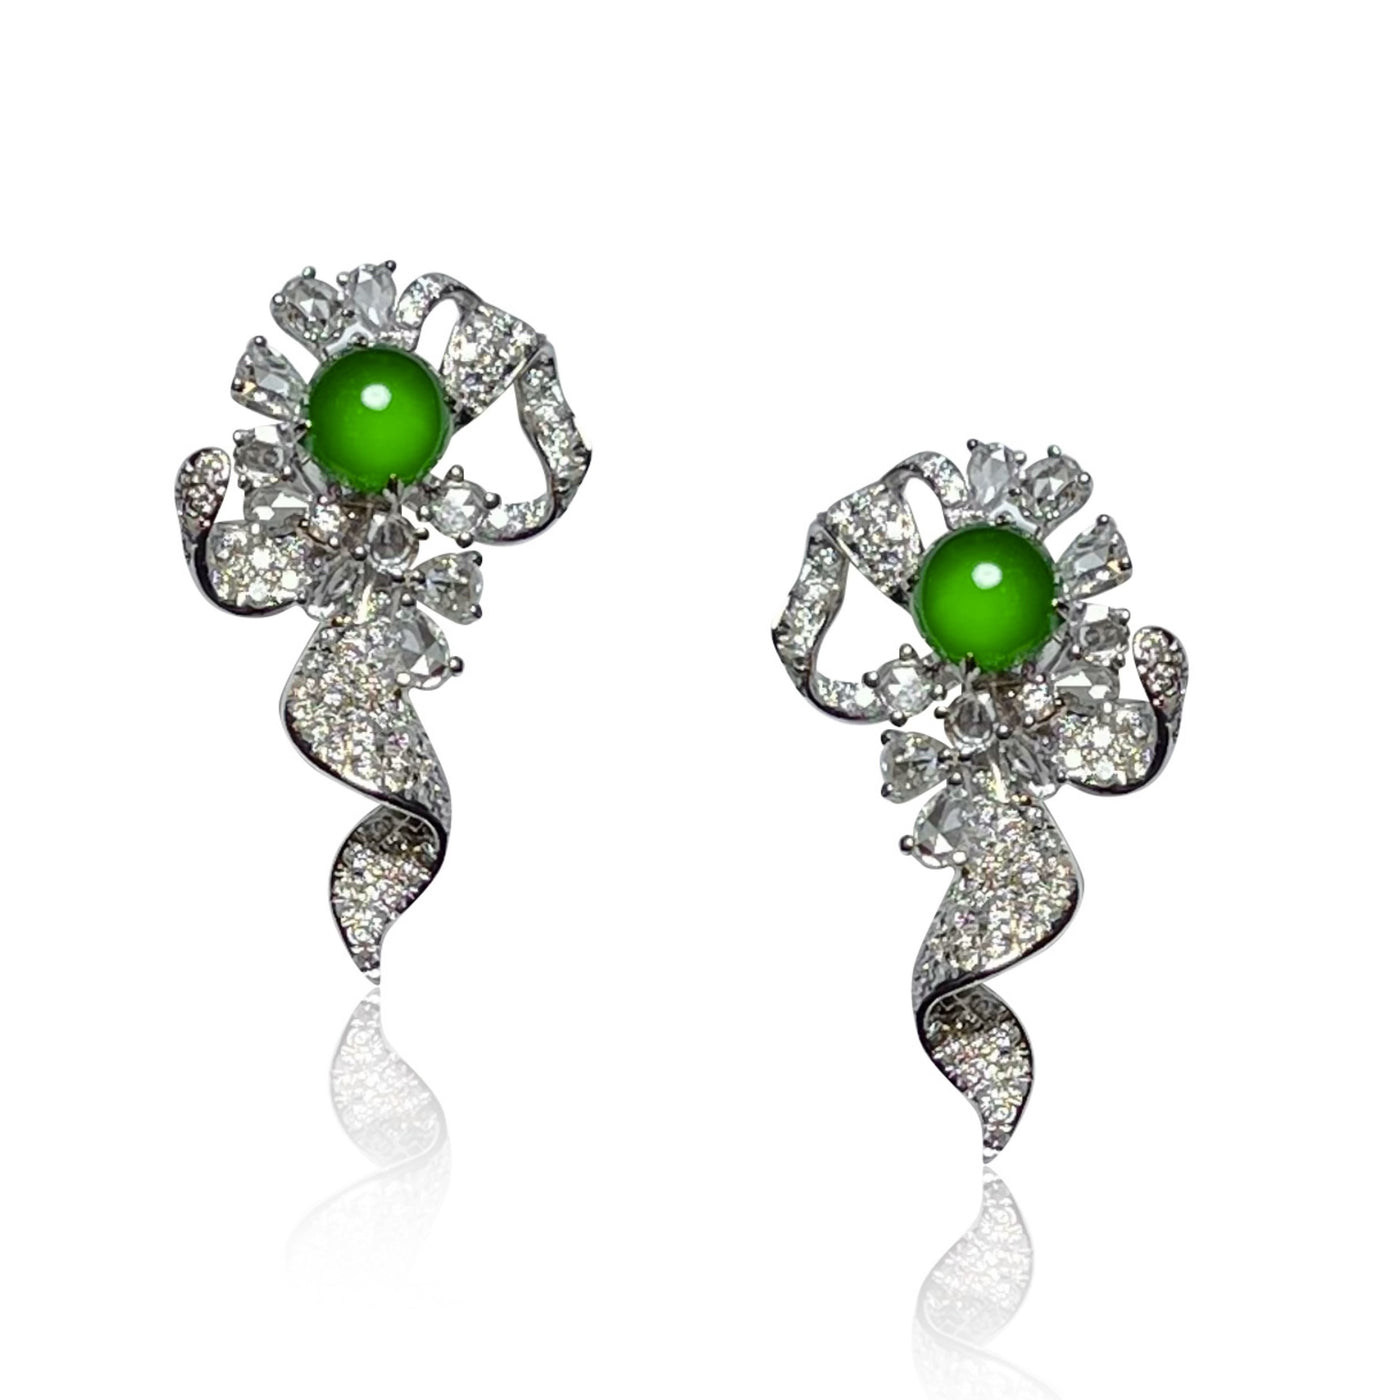 JADEITE CABOCHON EARRINGS IN 18K WHITE GOLD AND DIAMONDS